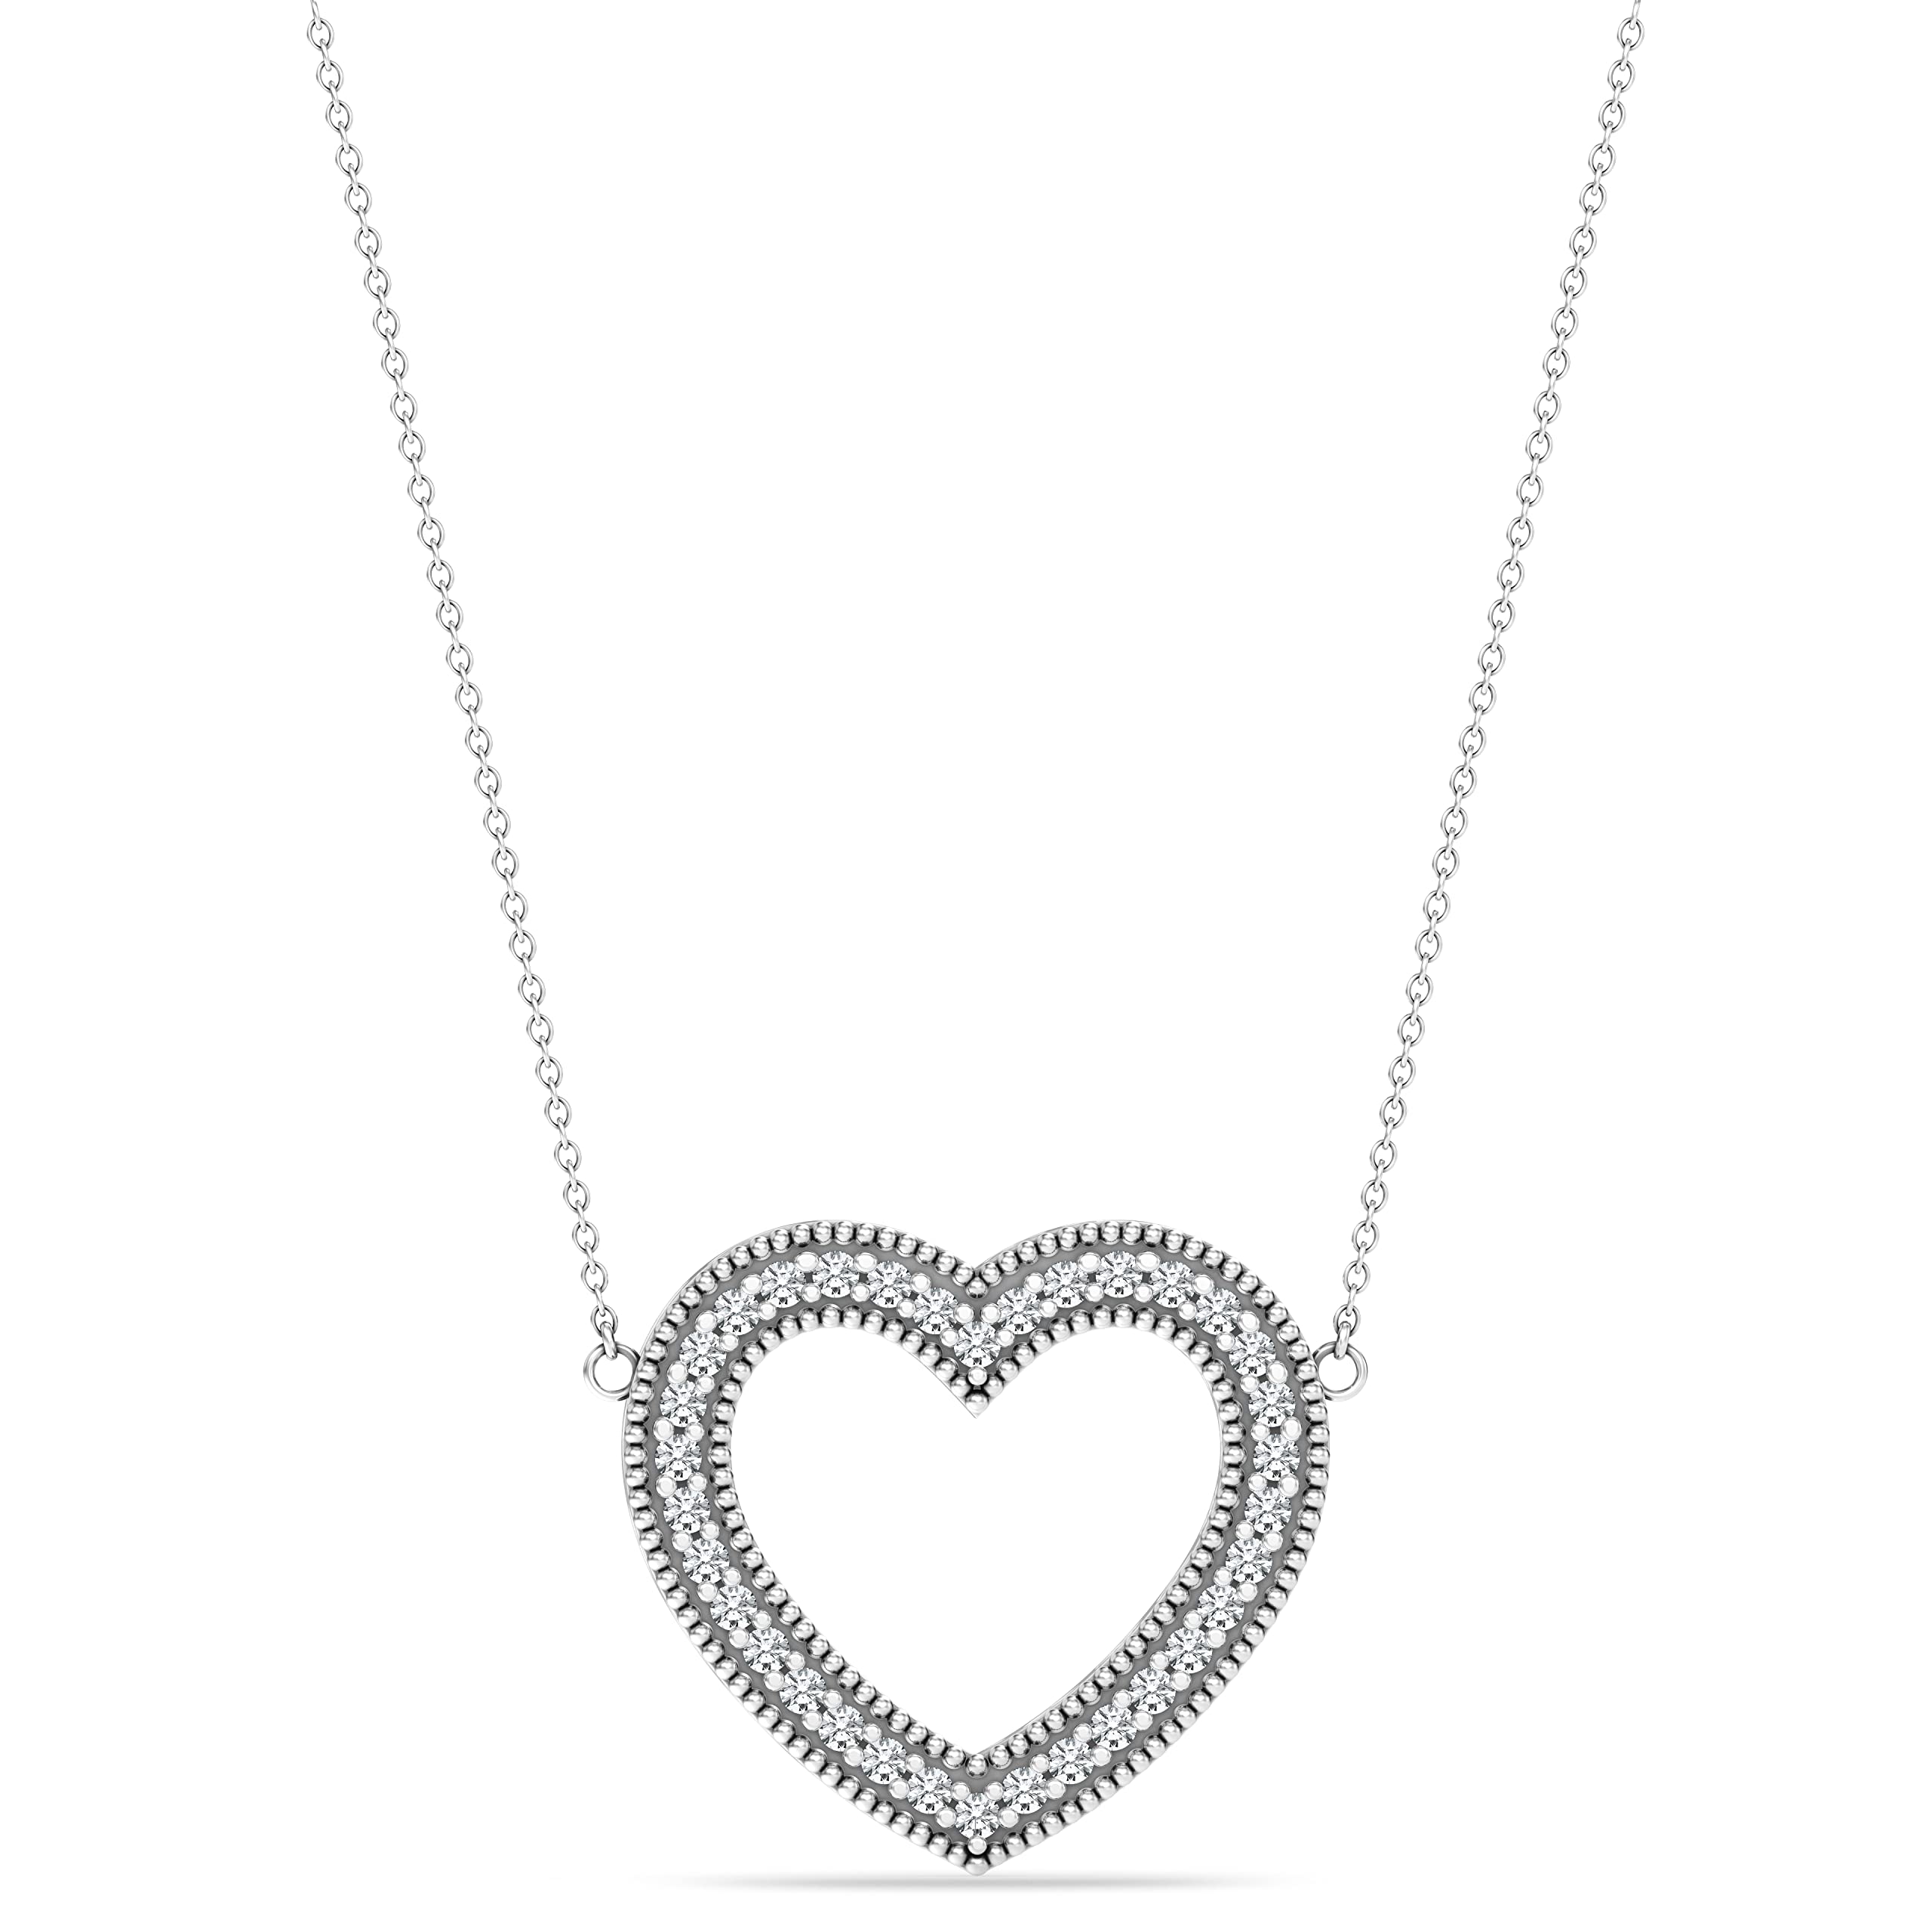 925 Sterling Silver Sparkling Open Heart Pendant Necklace for Women Teen